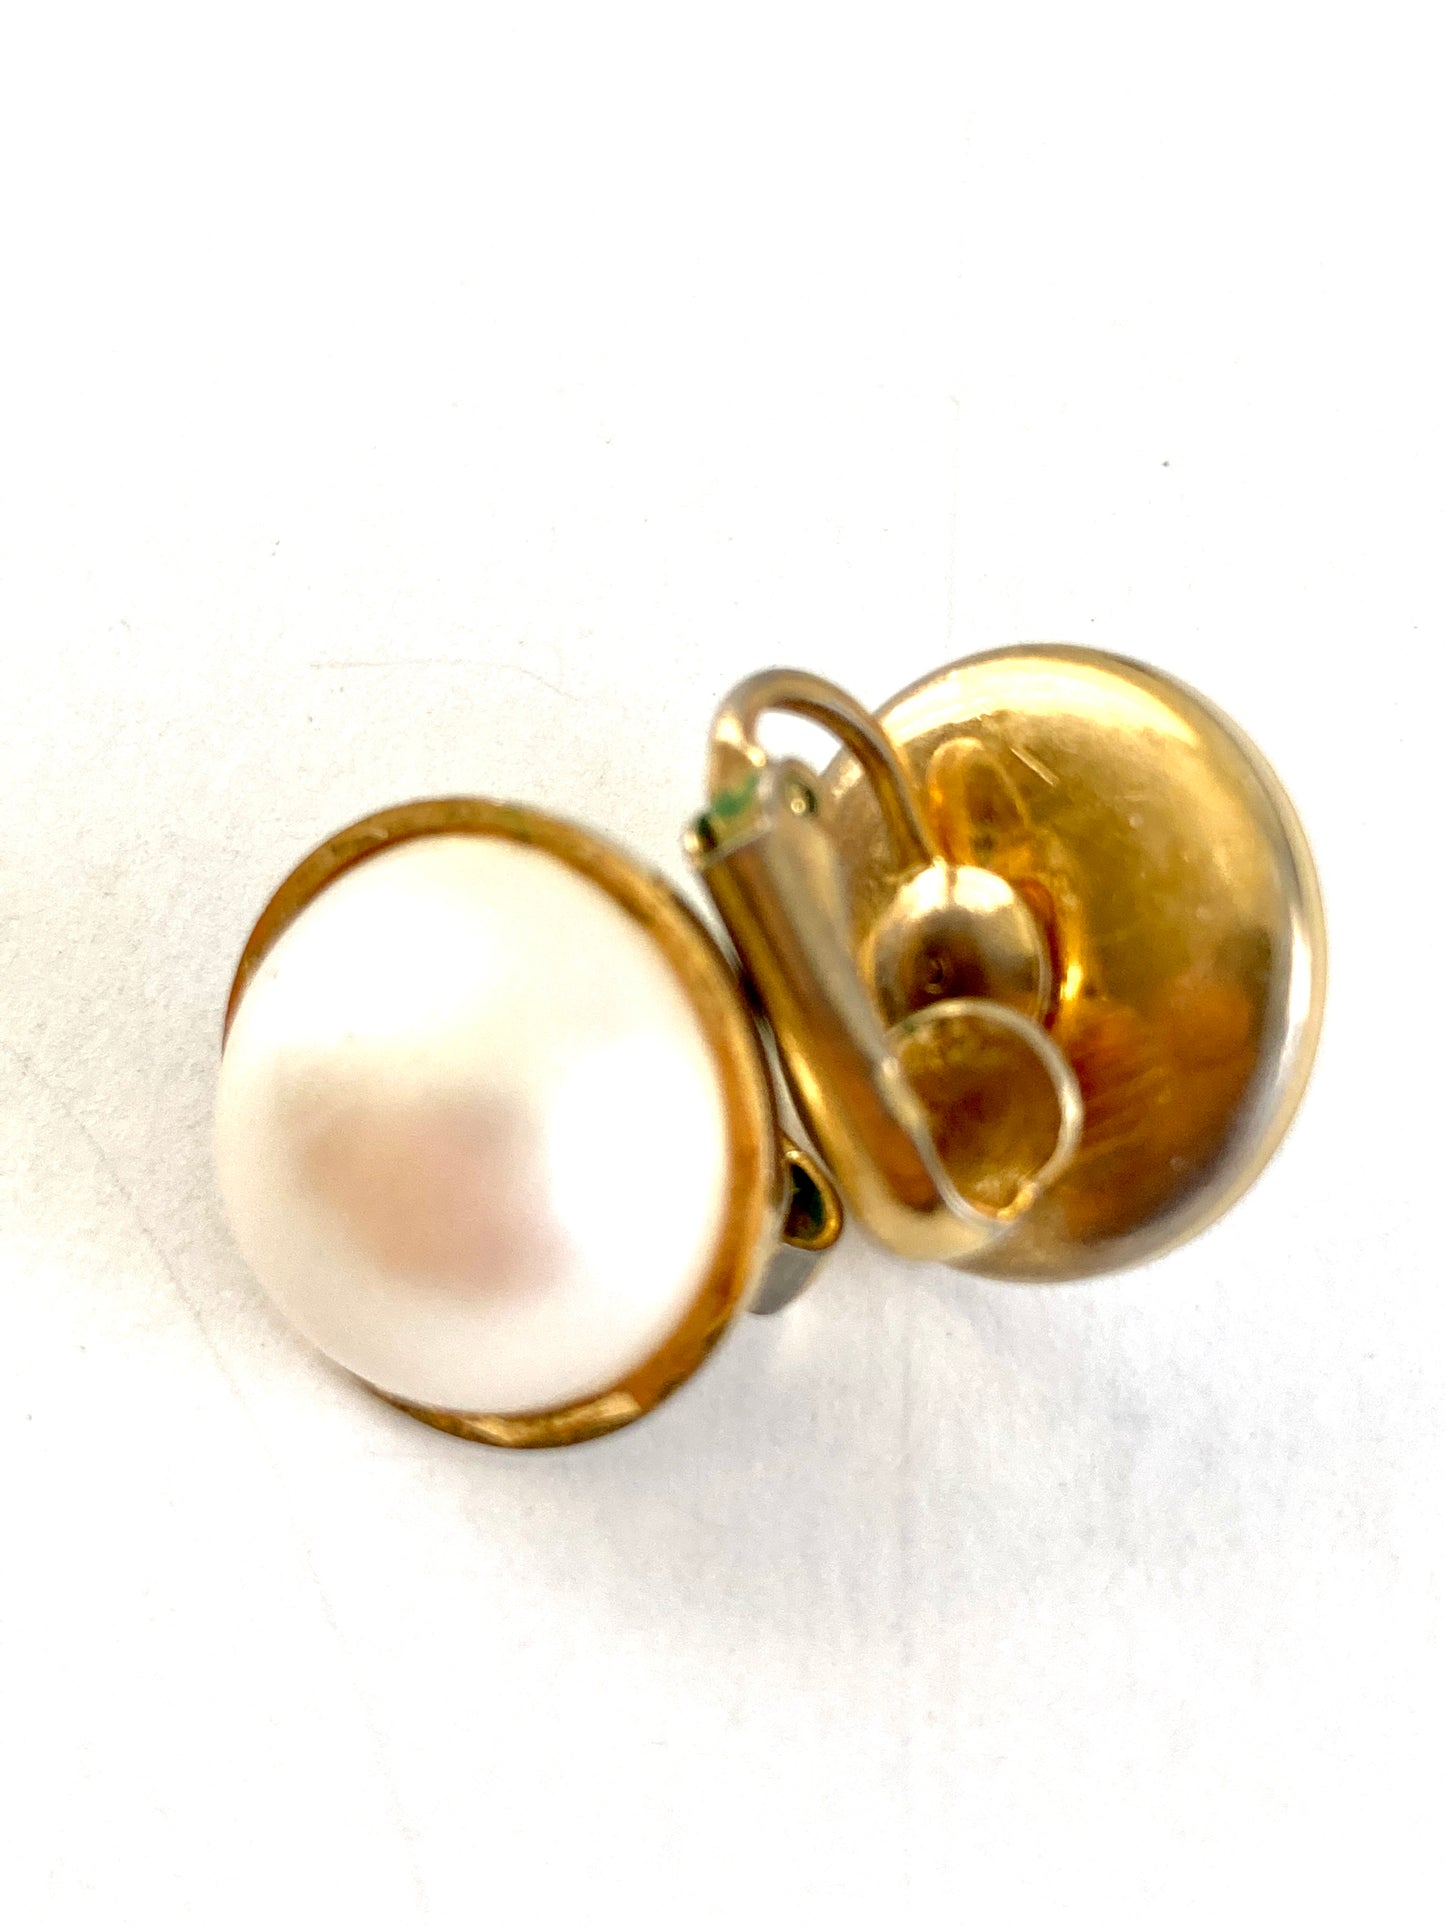 Large Half Round Pearl Button Earrings